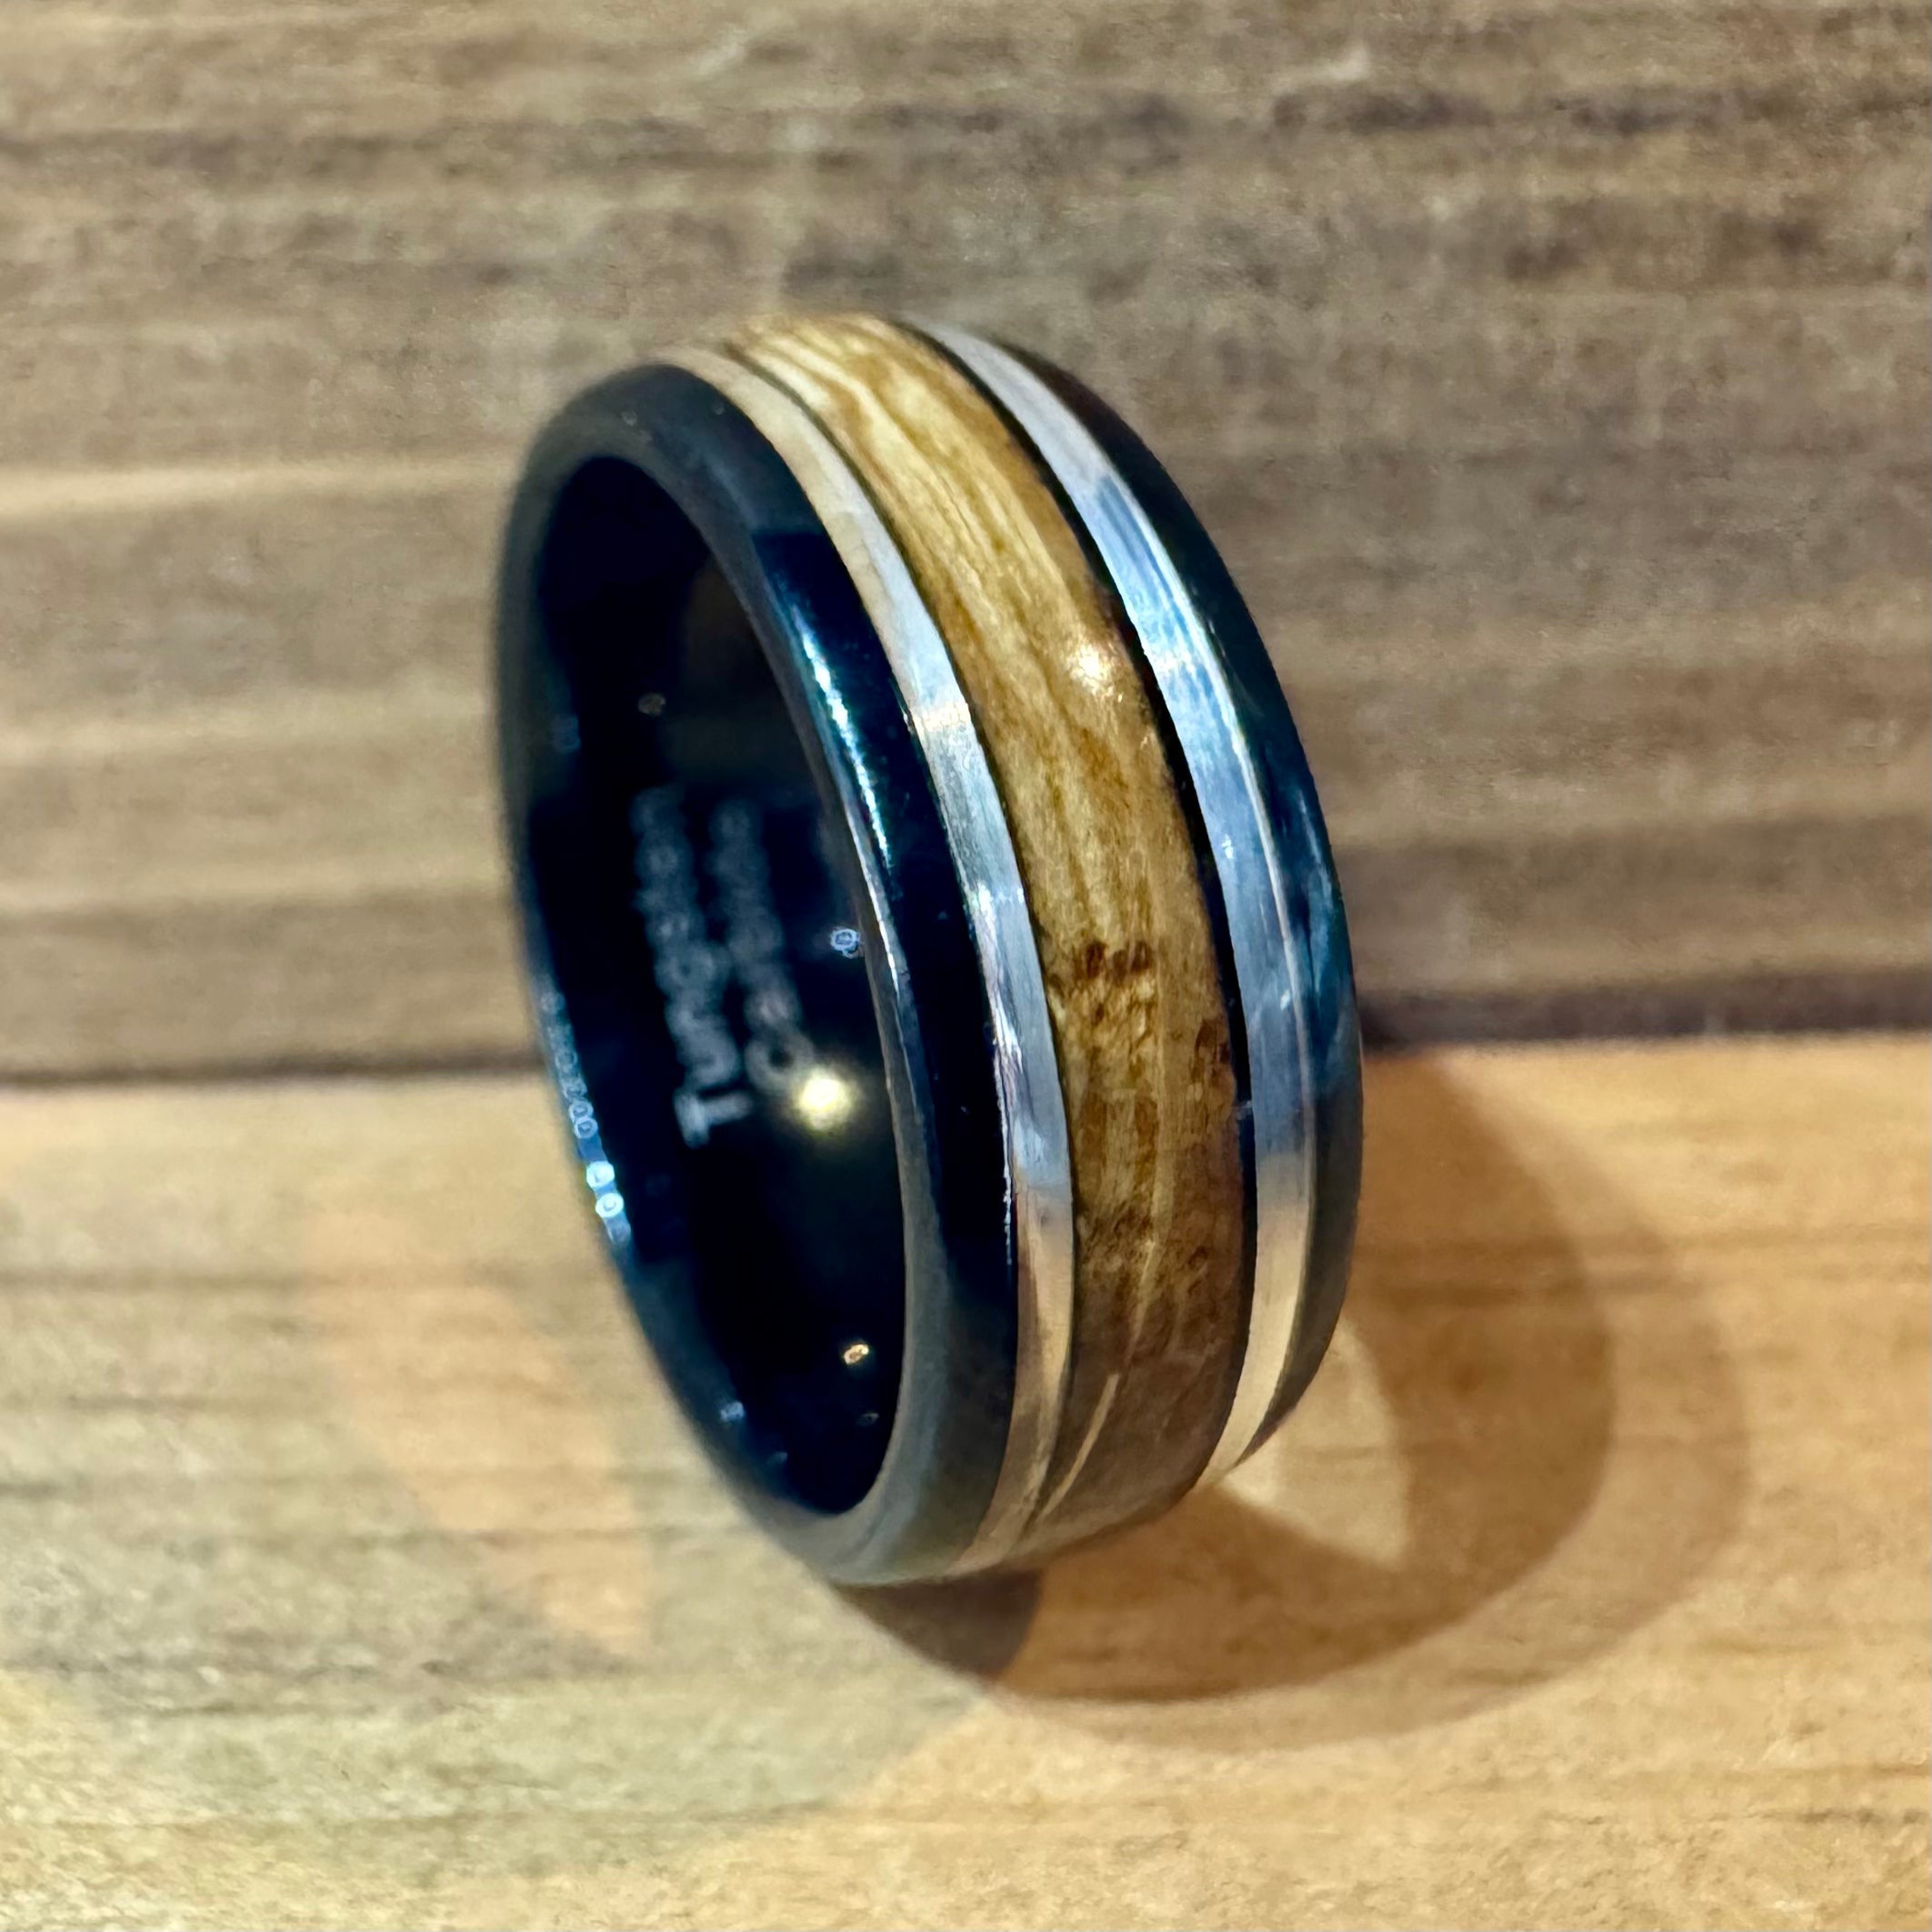 BW James Jewelers ALT Wedding Band “The Ranger” Black Tungsten With Reclaimed Bourbon Barrel Ring™ With Real Sterling Silver Inlay